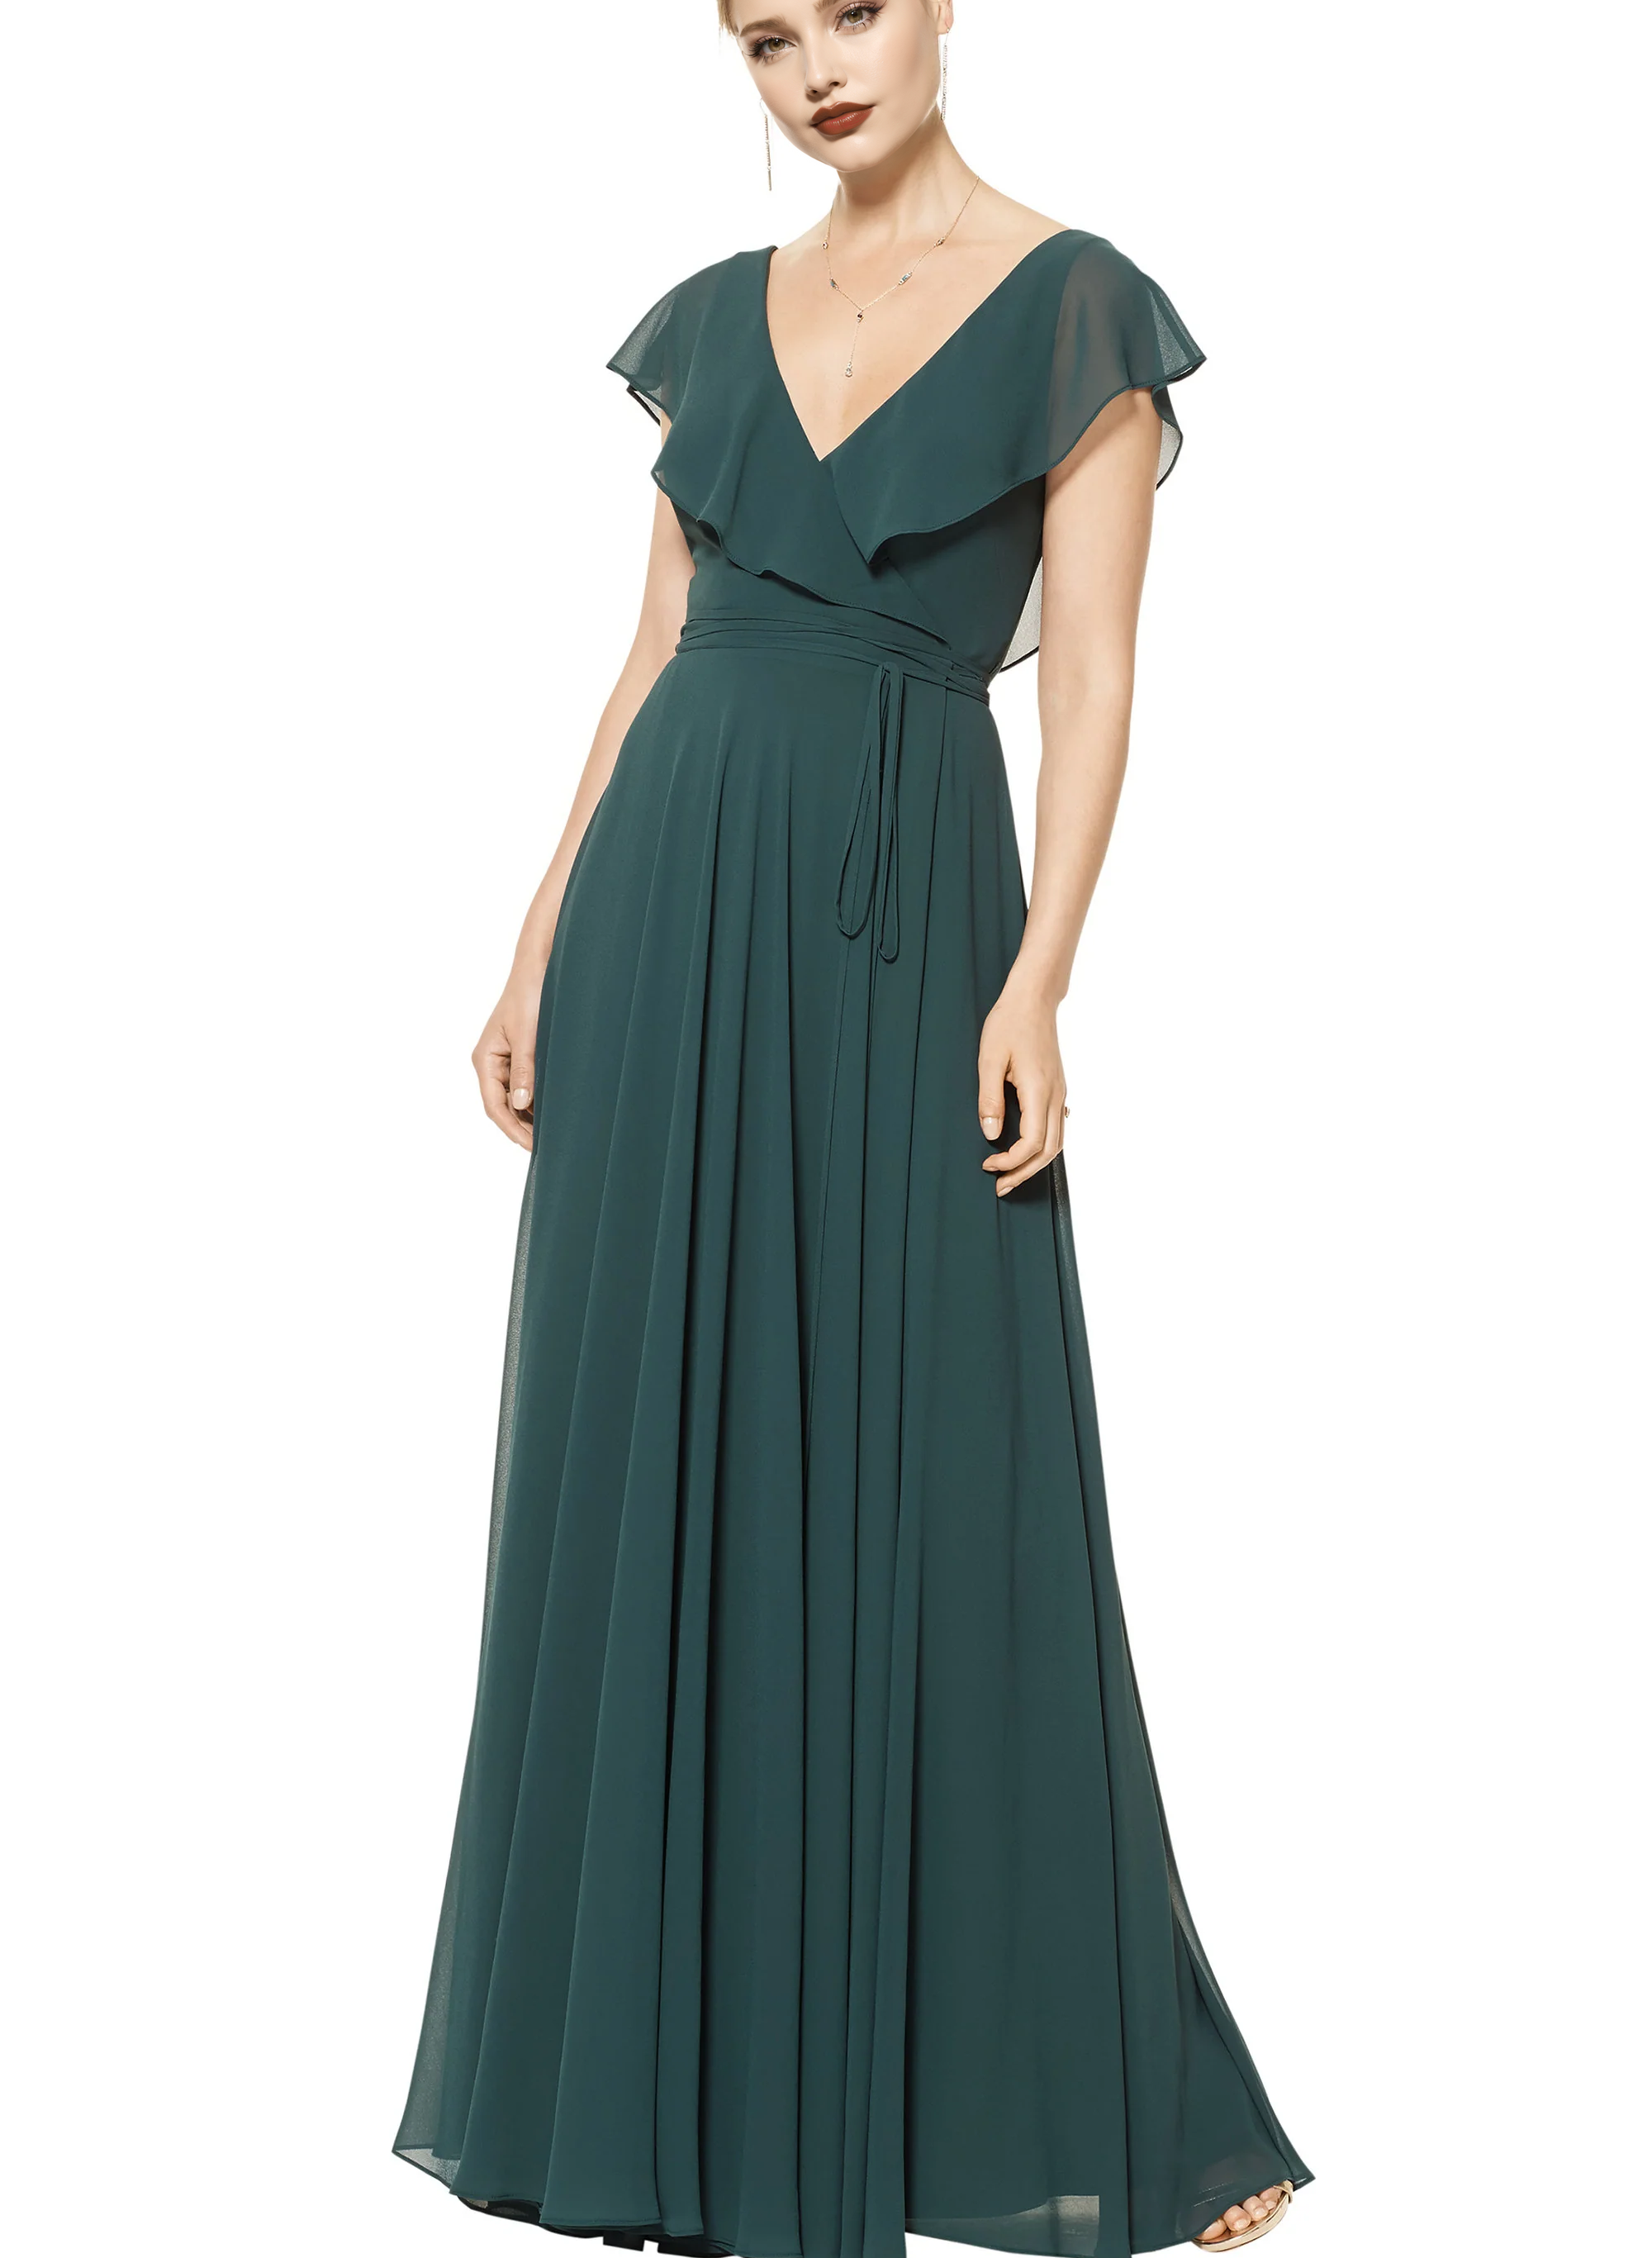 Green A-Line Long V-Neck Bridesmaid Dresses With Open Back